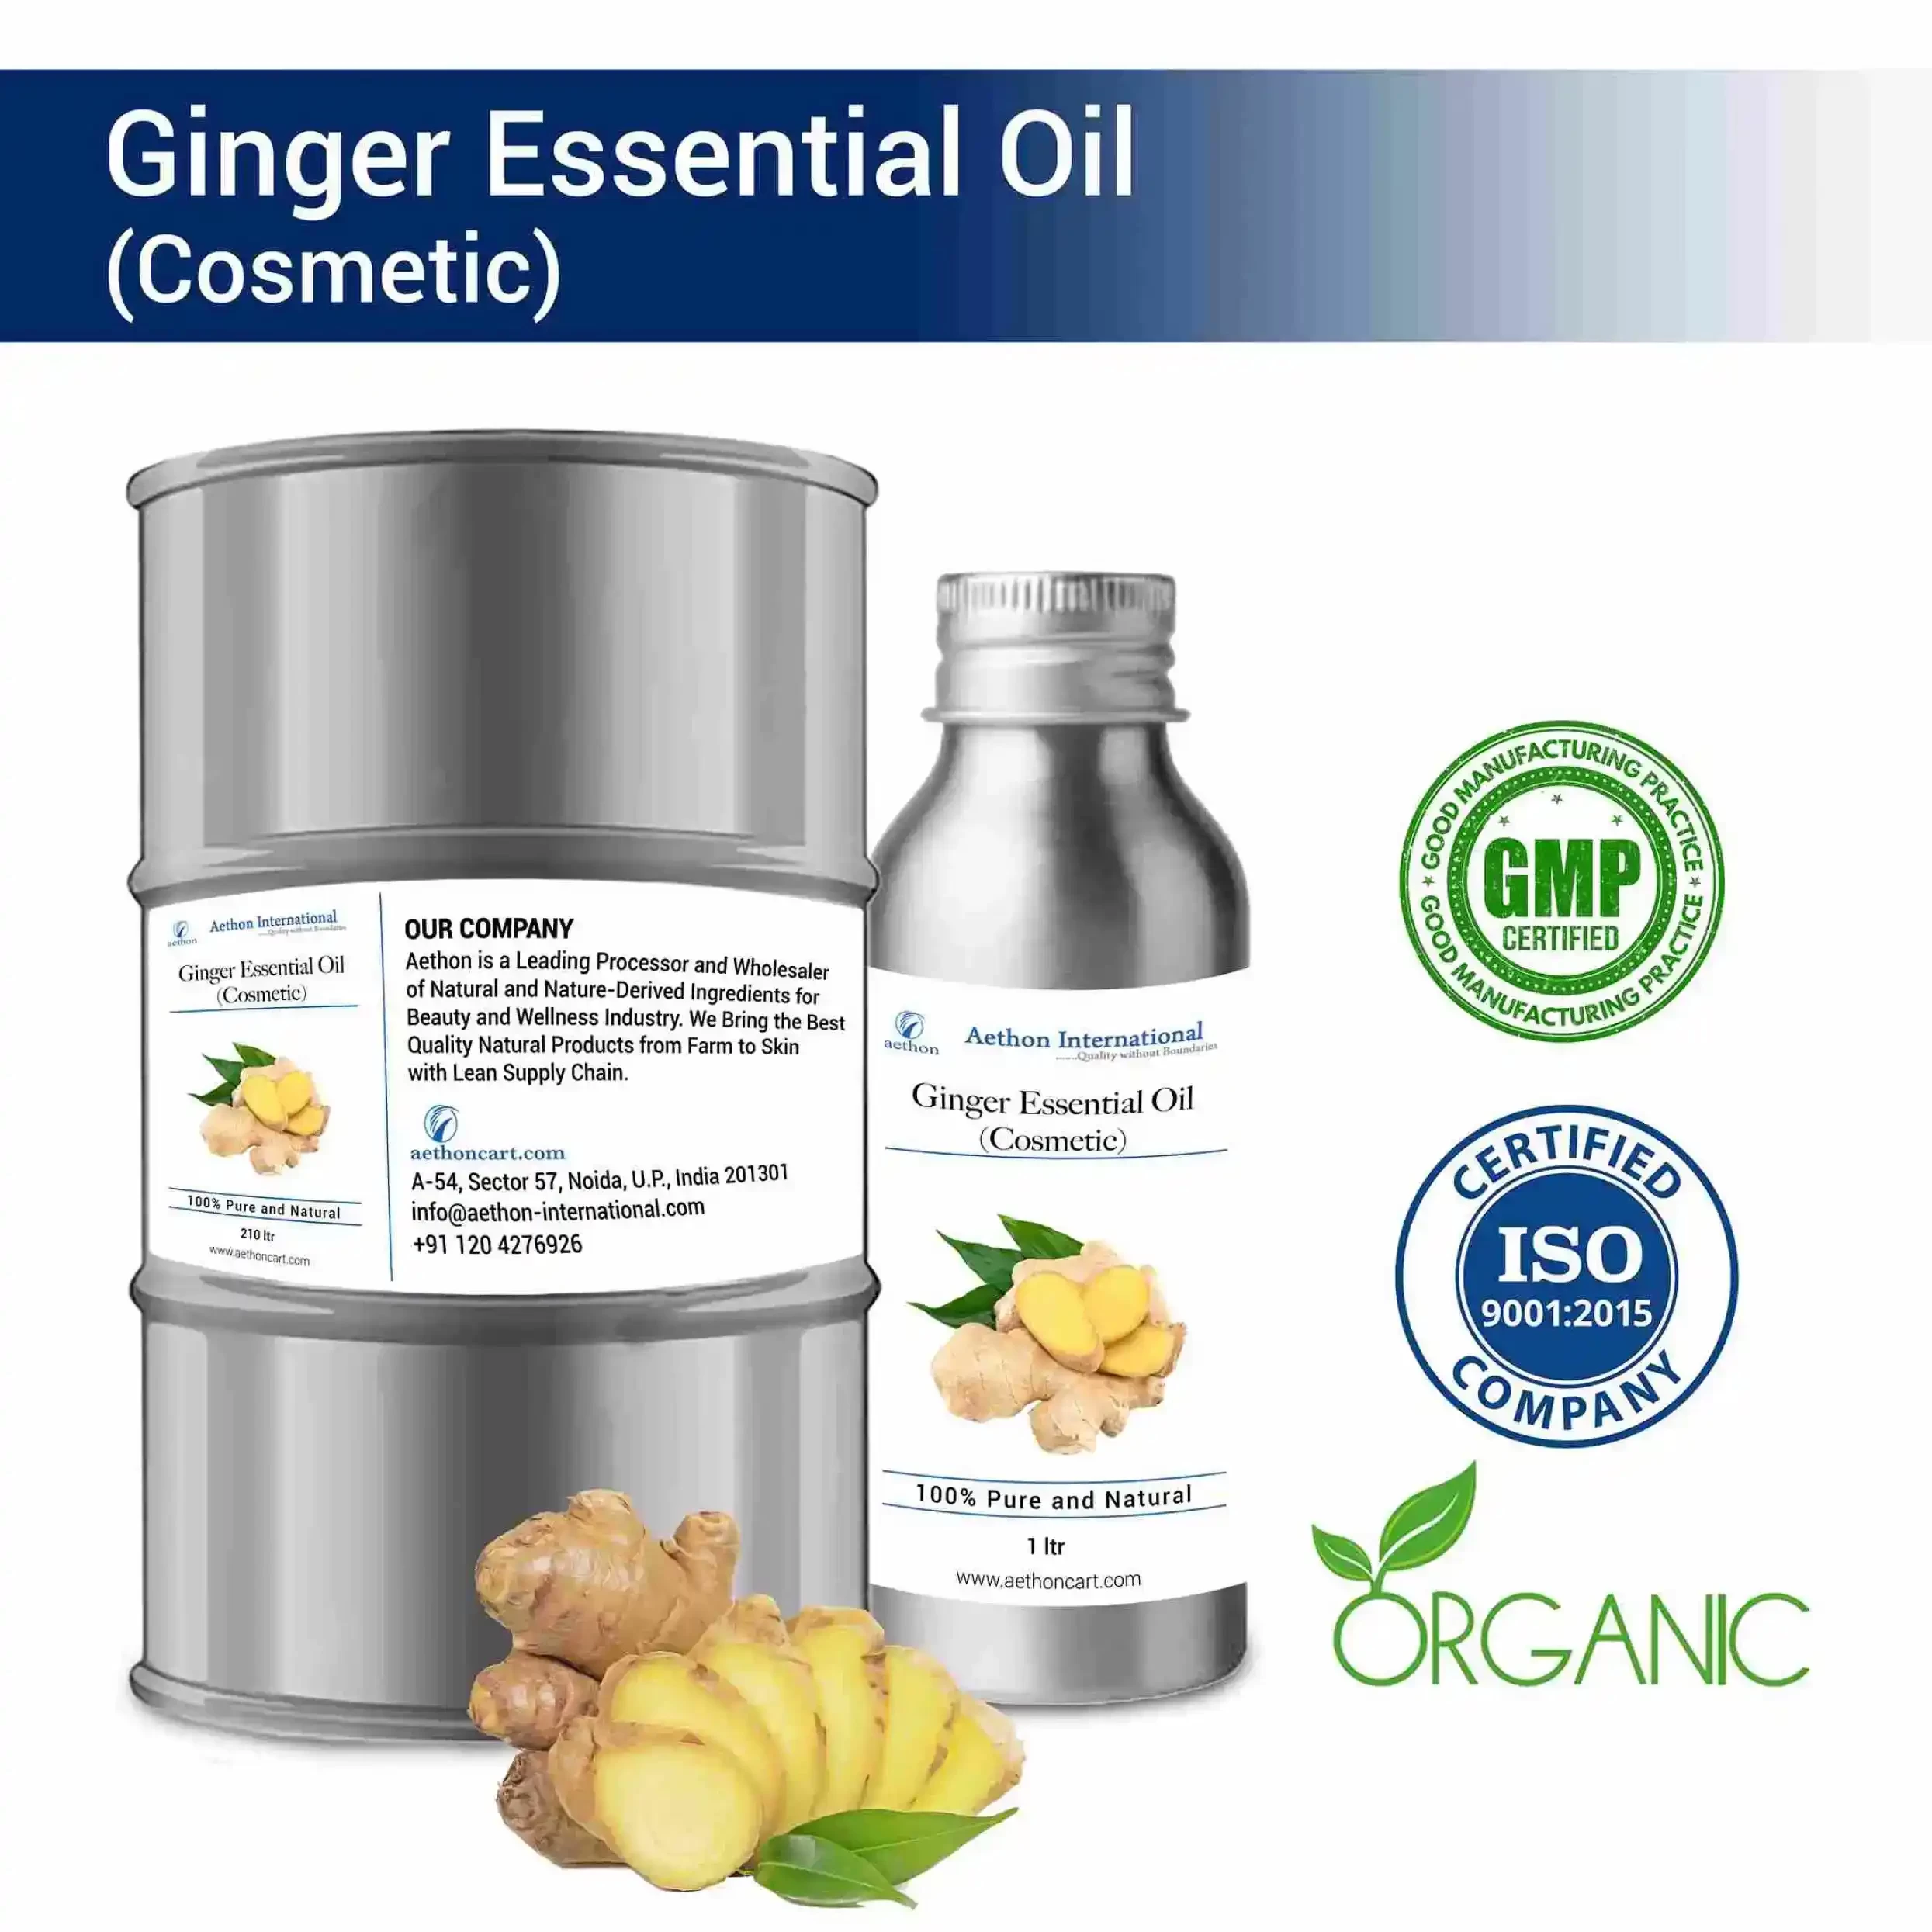 Ginger Essential Oil (Cosmetic)